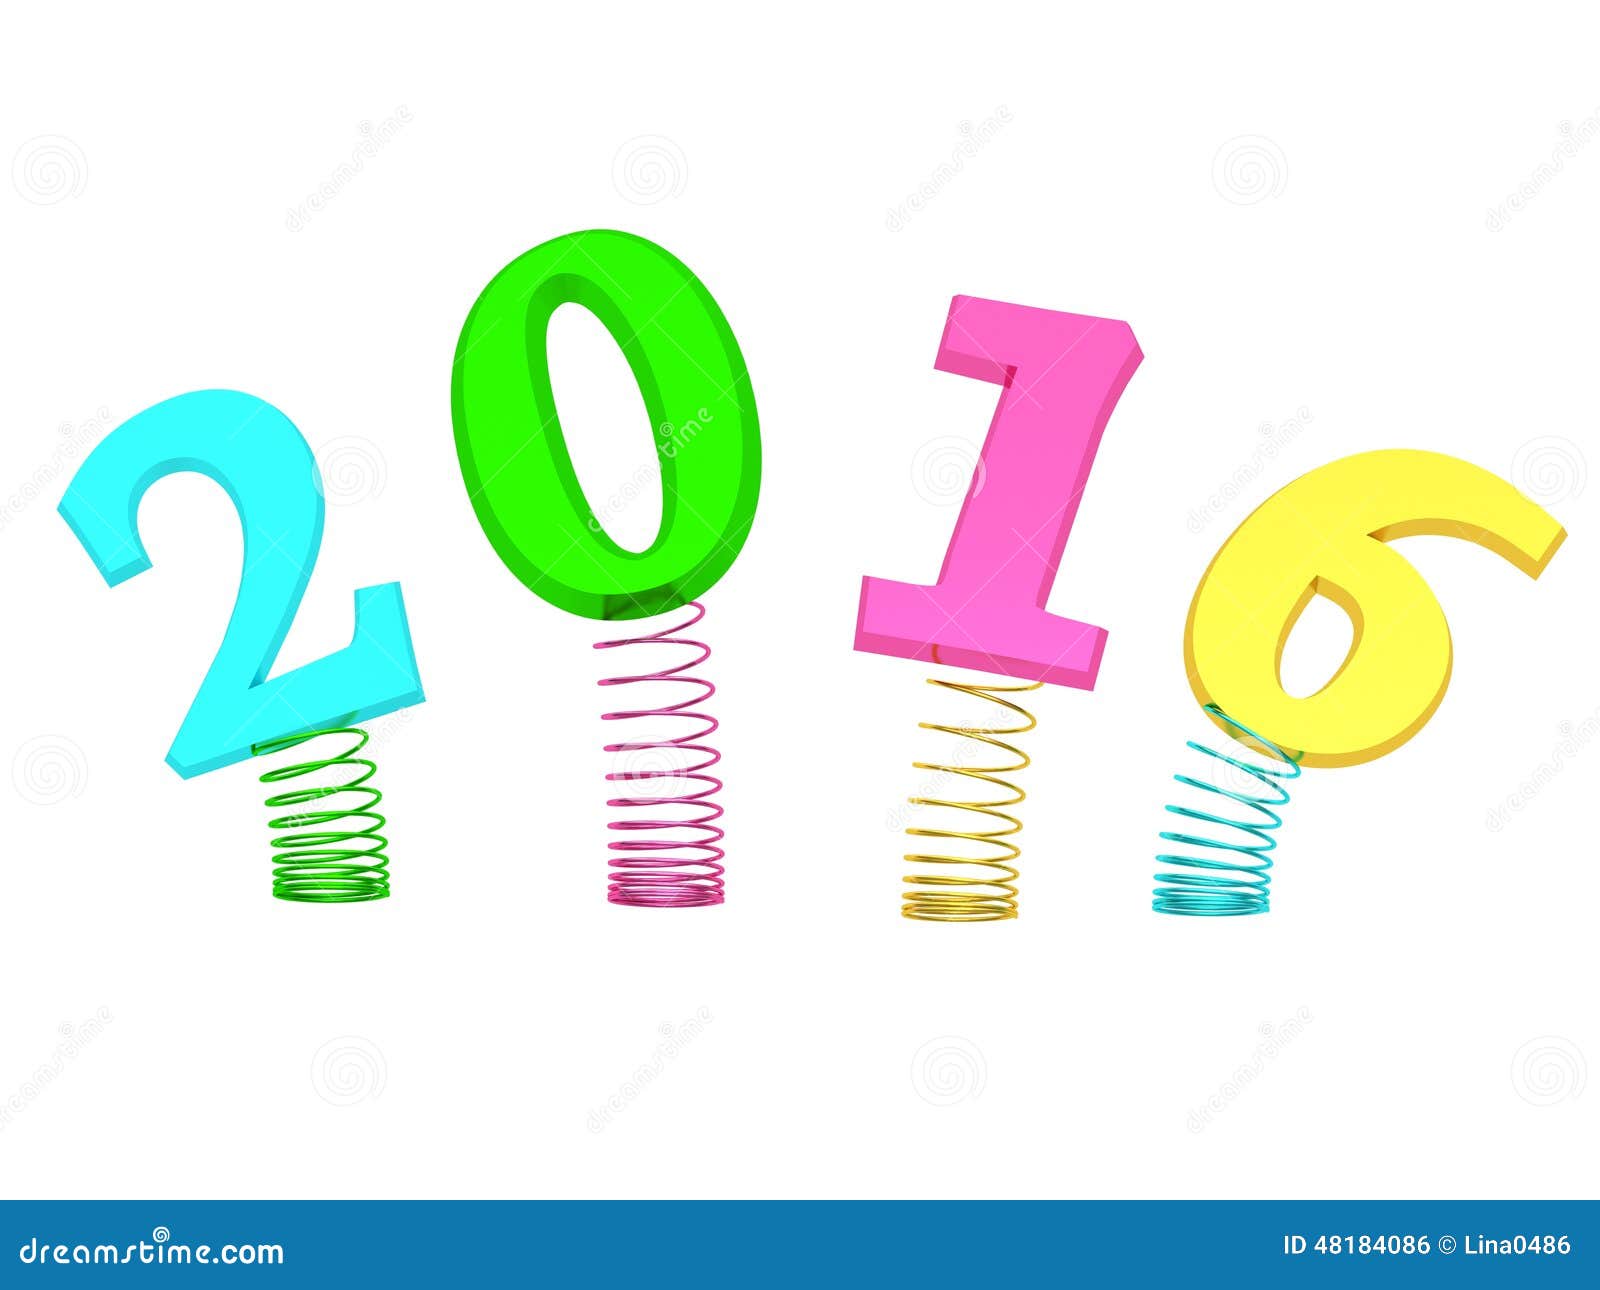 http://thumbs.dreamstime.com/z/numbers-colorful-isolated-white-background-48184086.jpg